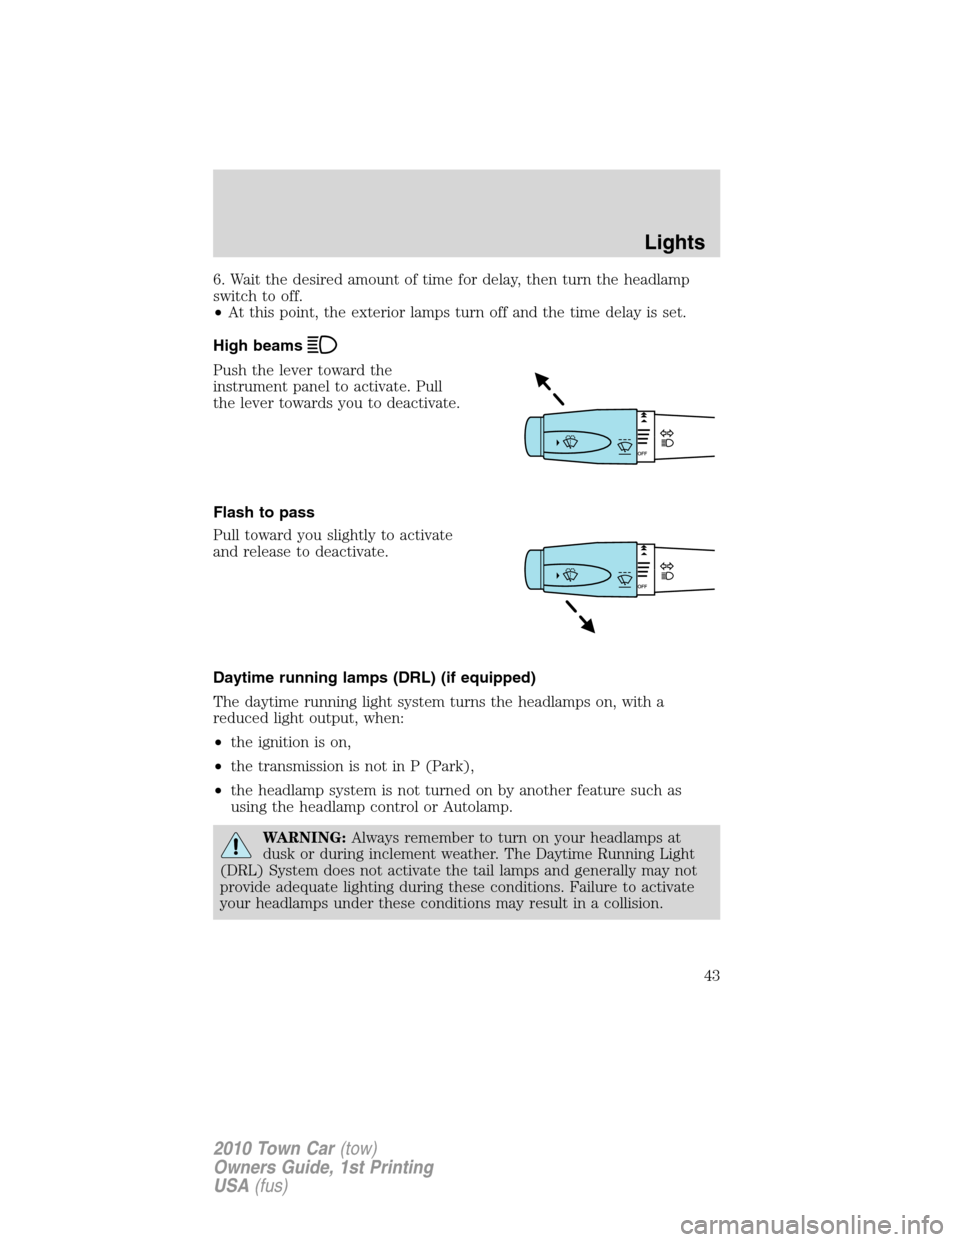 LINCOLN TOWN CAR 2010 User Guide 6. Wait the desired amount of time for delay, then turn the headlamp
switch to off.
•At this point, the exterior lamps turn off and the time delay is set.
High beams
Push the lever toward the
instru